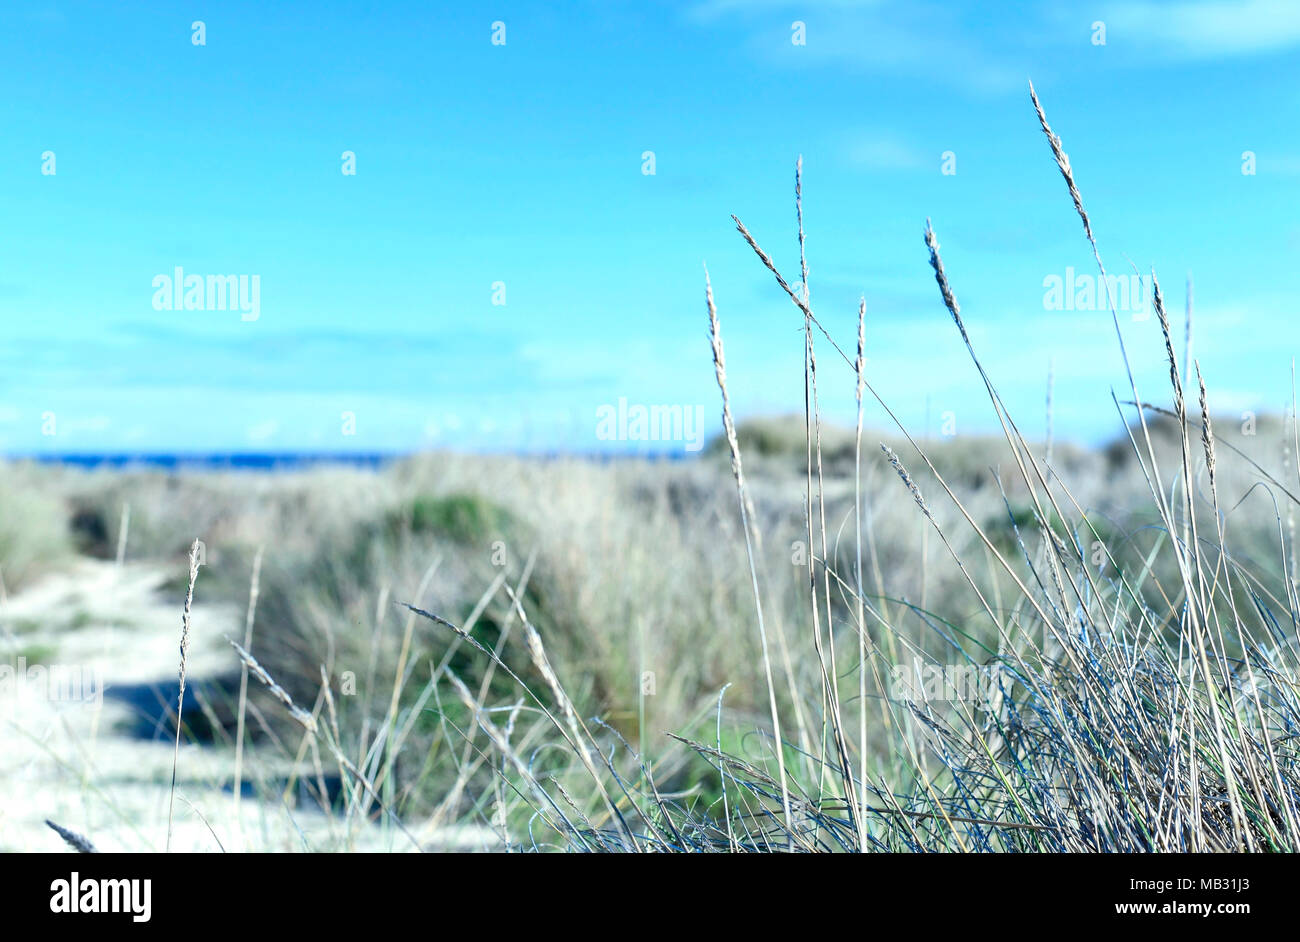 Beach background with blue sea, beach dunes and grass. Sea scene with white sand and copy space. Summer vacations. Stock Photo